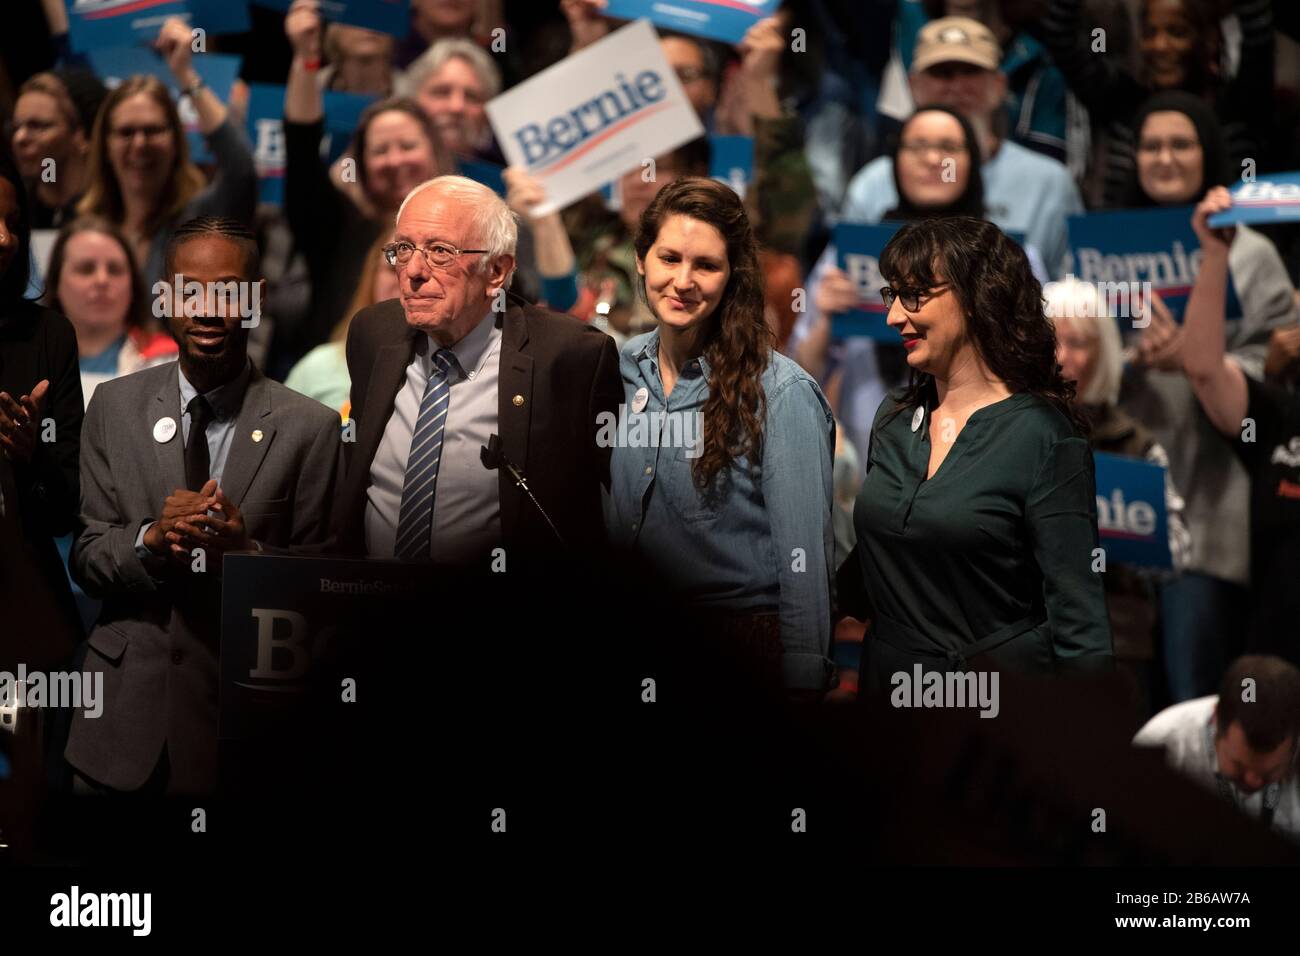 Saint Louis, MO, USA - March 9, 2020: Senator Bernie Sanders with supporters at the Bernie 2020 Rally in Downtown Saint Louis. Stock Photo